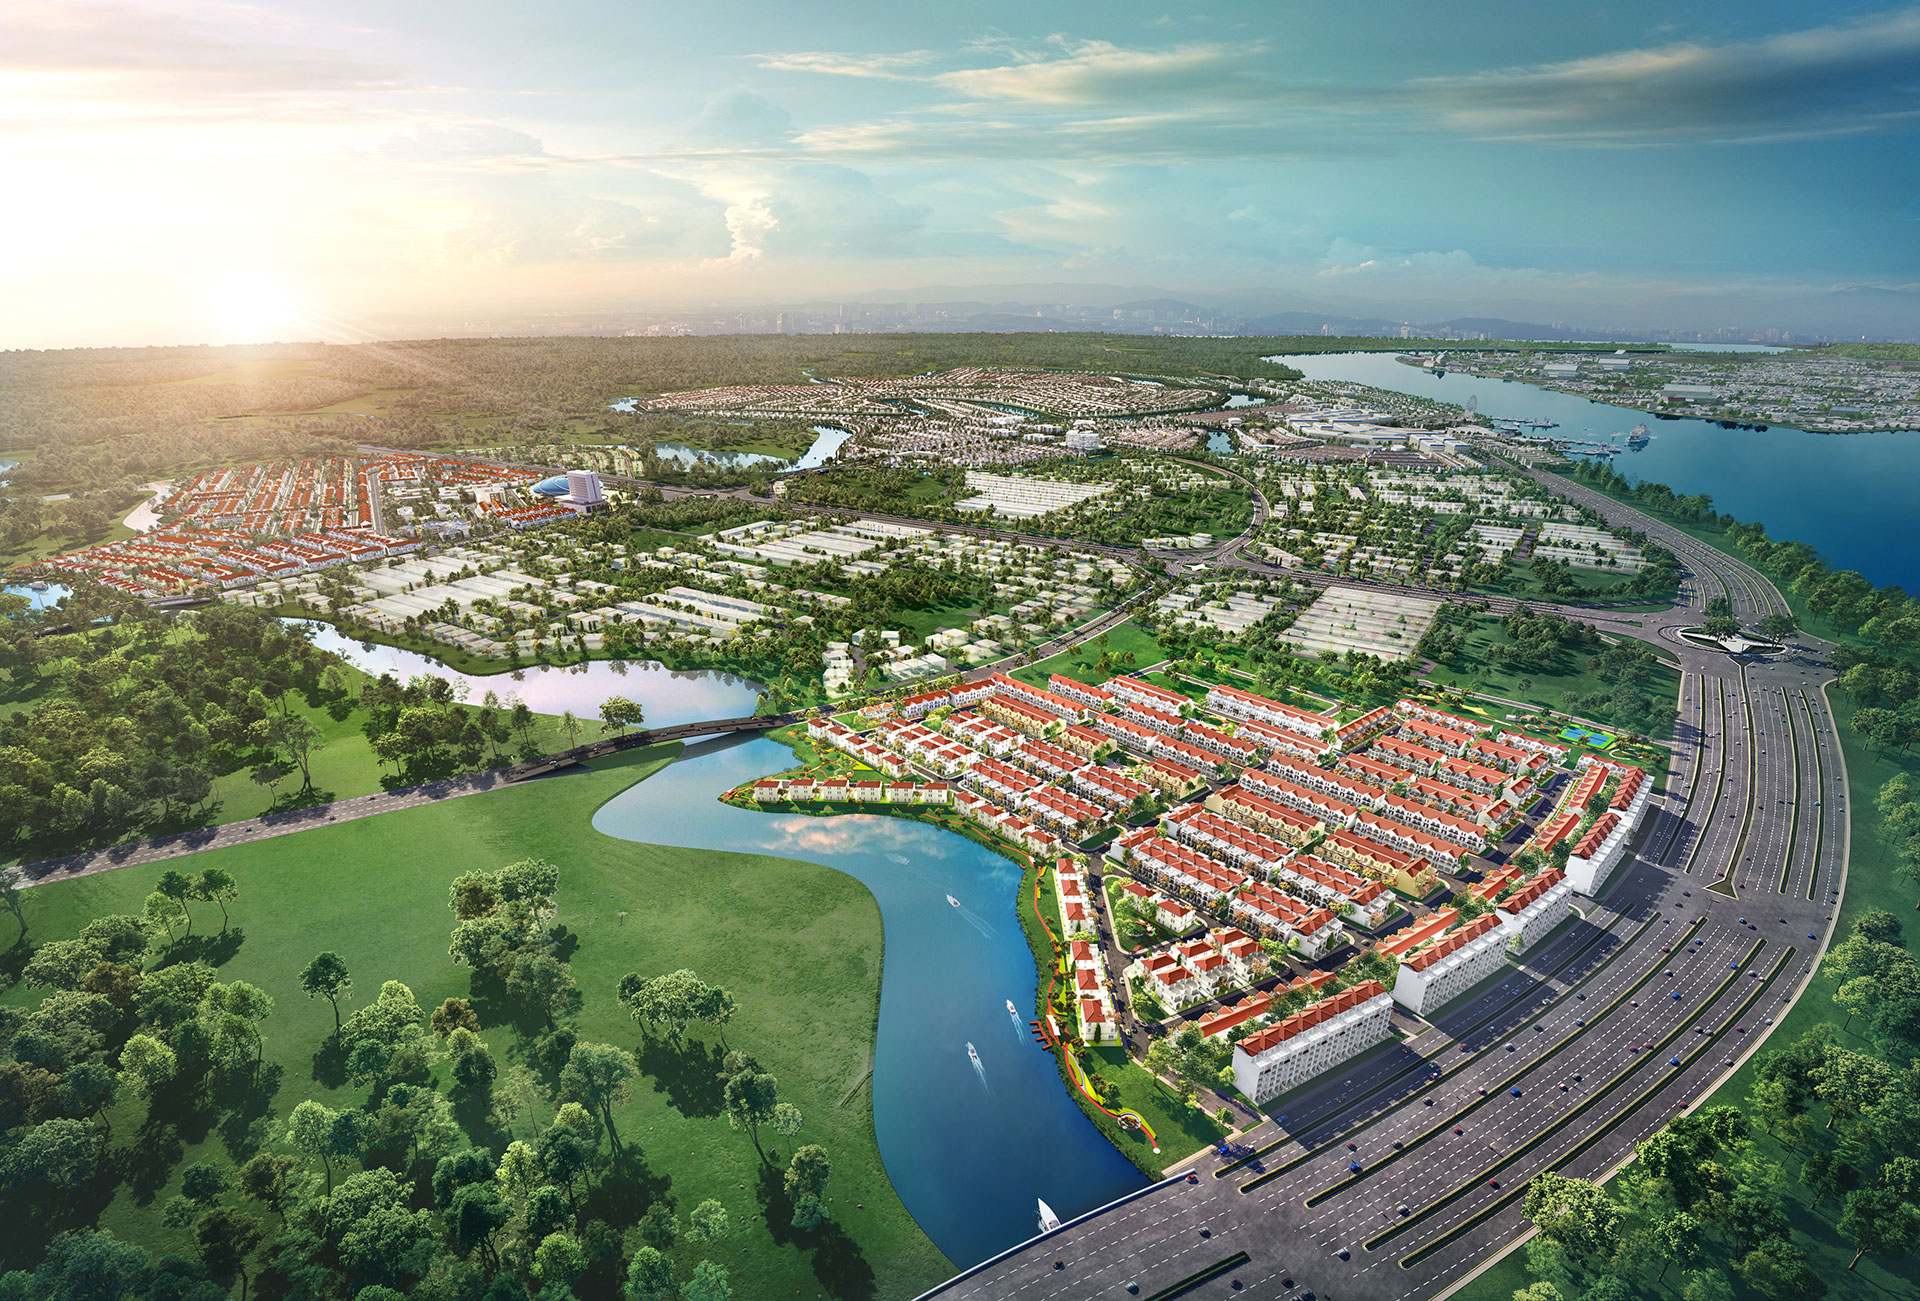 The partnership will provide building materials for the Aqua City leisure and tourism development in Ho Chi Minh City. Image: Novaland